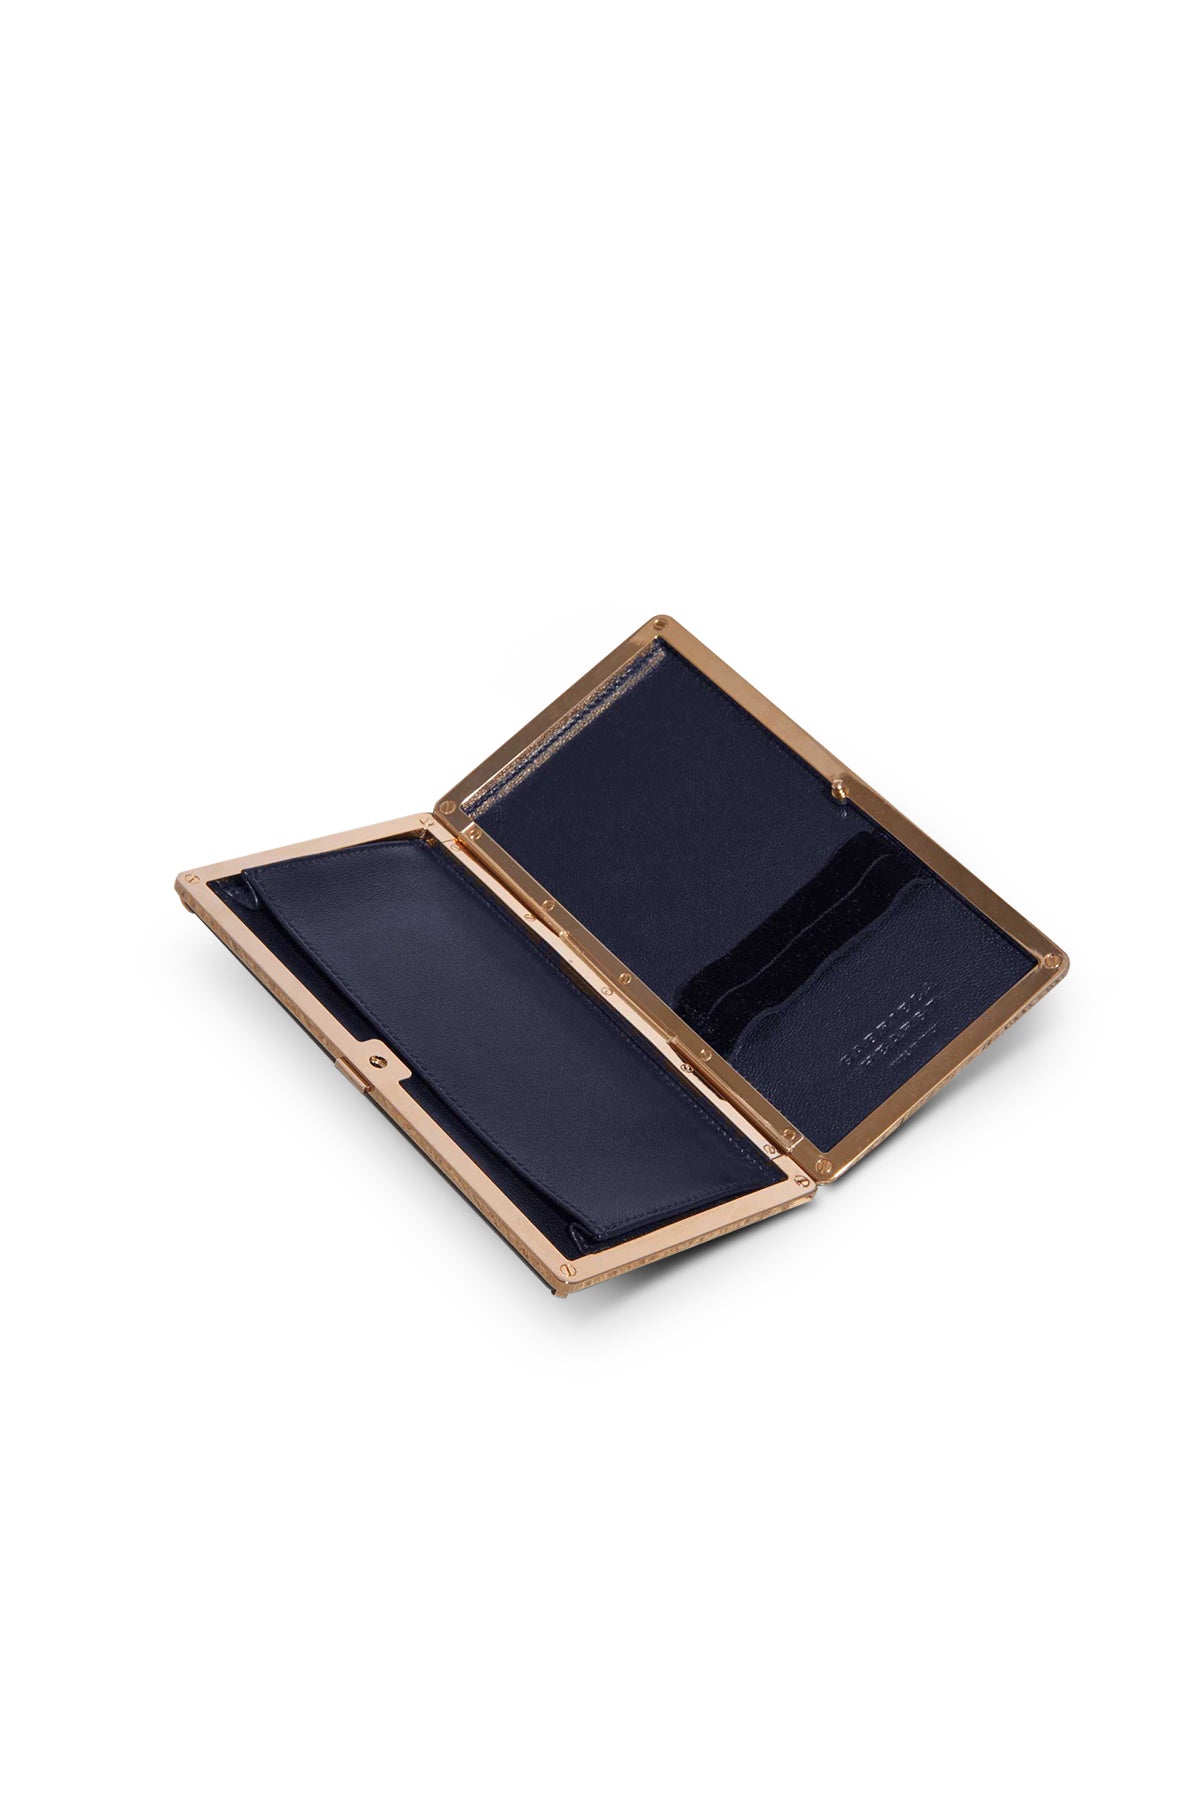 Callas Clutch in Navy Nappa Leather